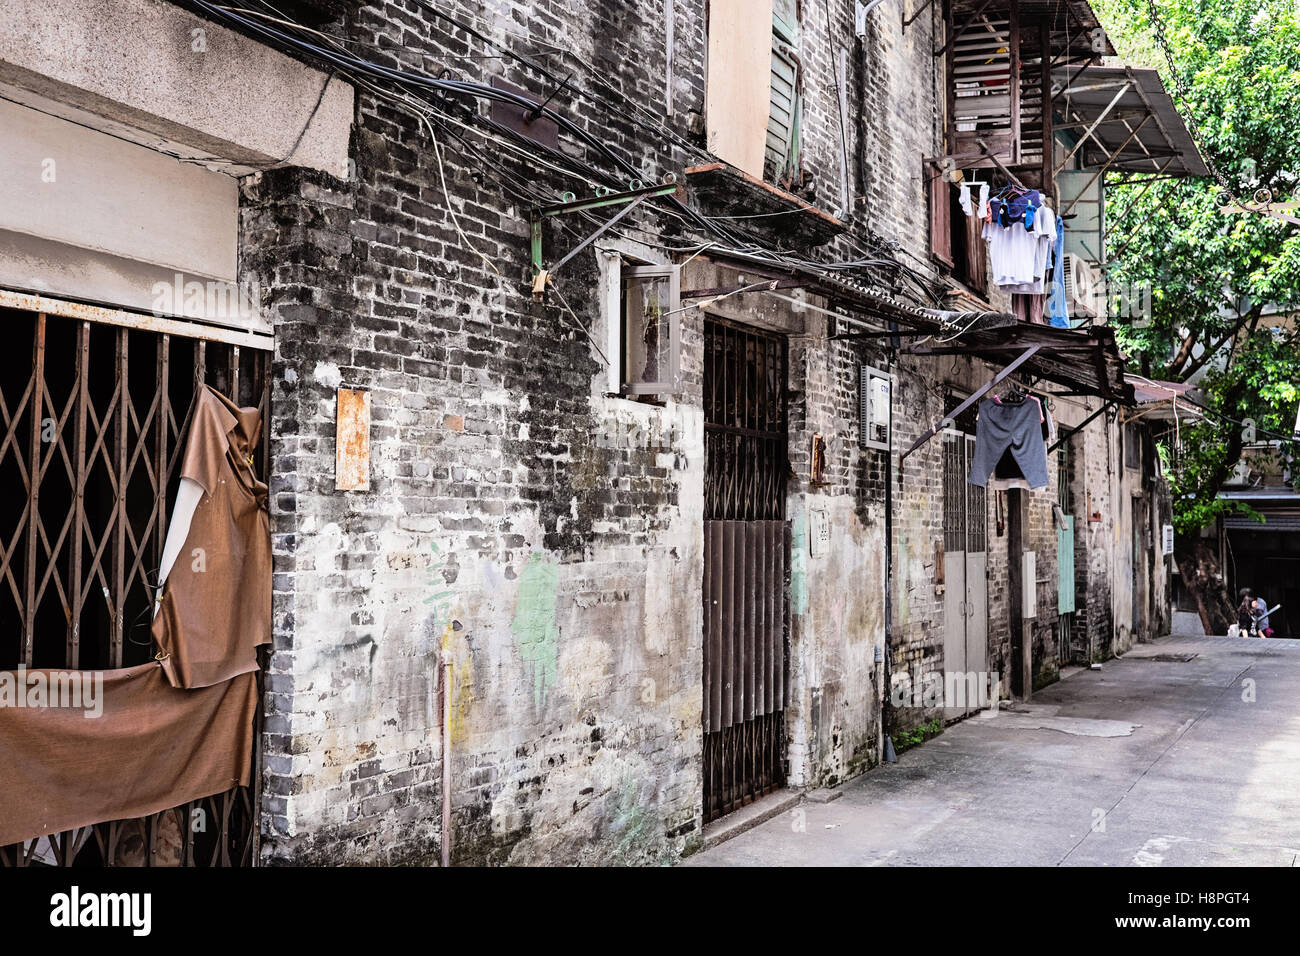 Gritty buildings in Macao Stock Photo